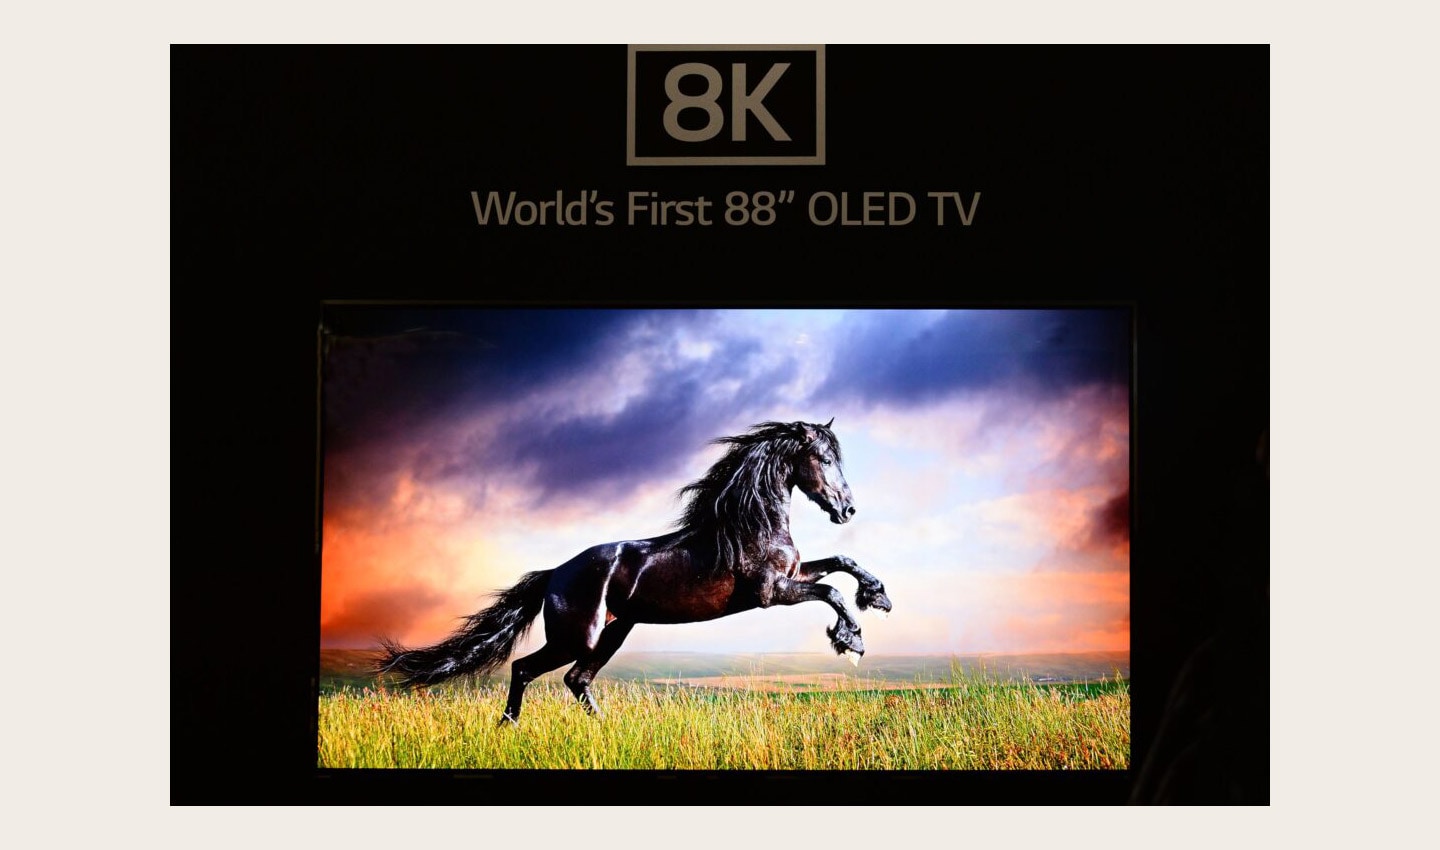 Front close-up view of World’s First 8K OLED TV display at IFA 2018, showing a leaping horse on the screen